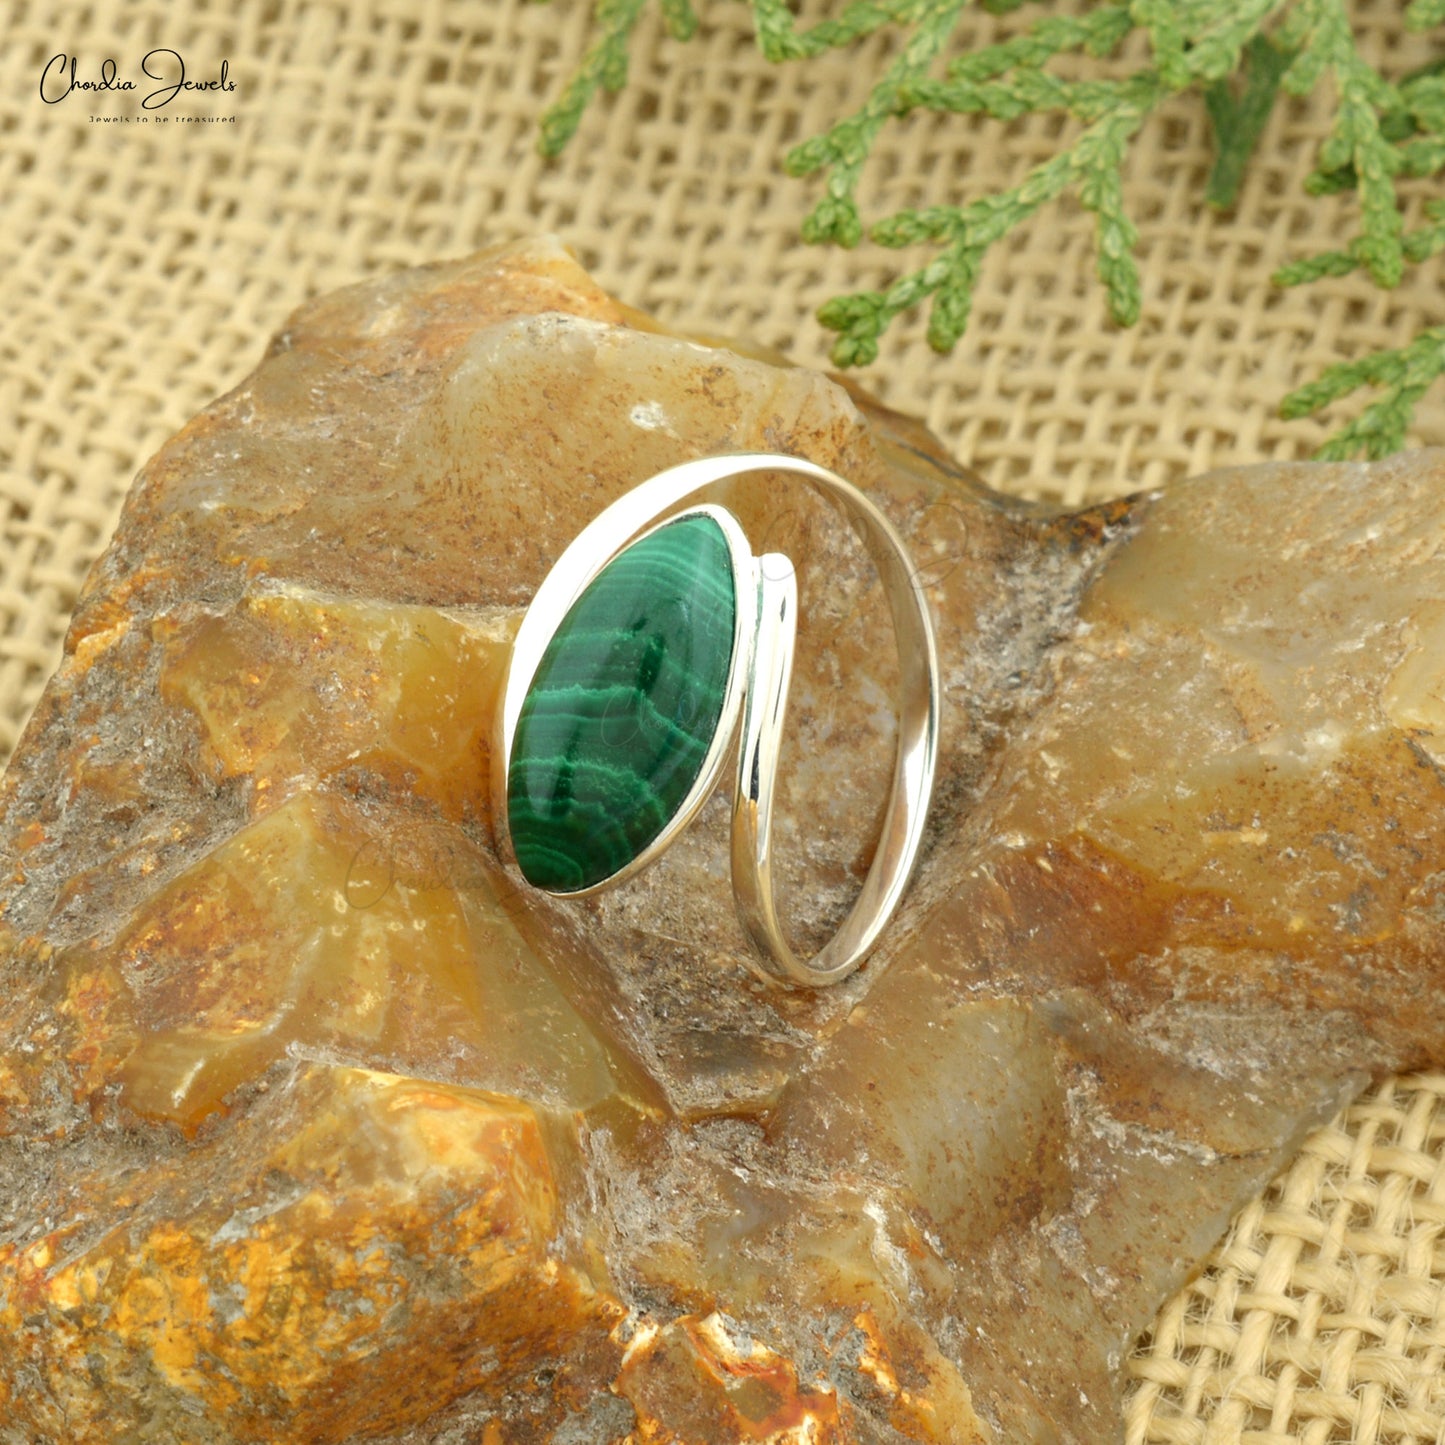 Fine Quality Jewelry 925 Sterling Silver Solitaire Ring with Malachite Marquise Bezel Set At Offer Price